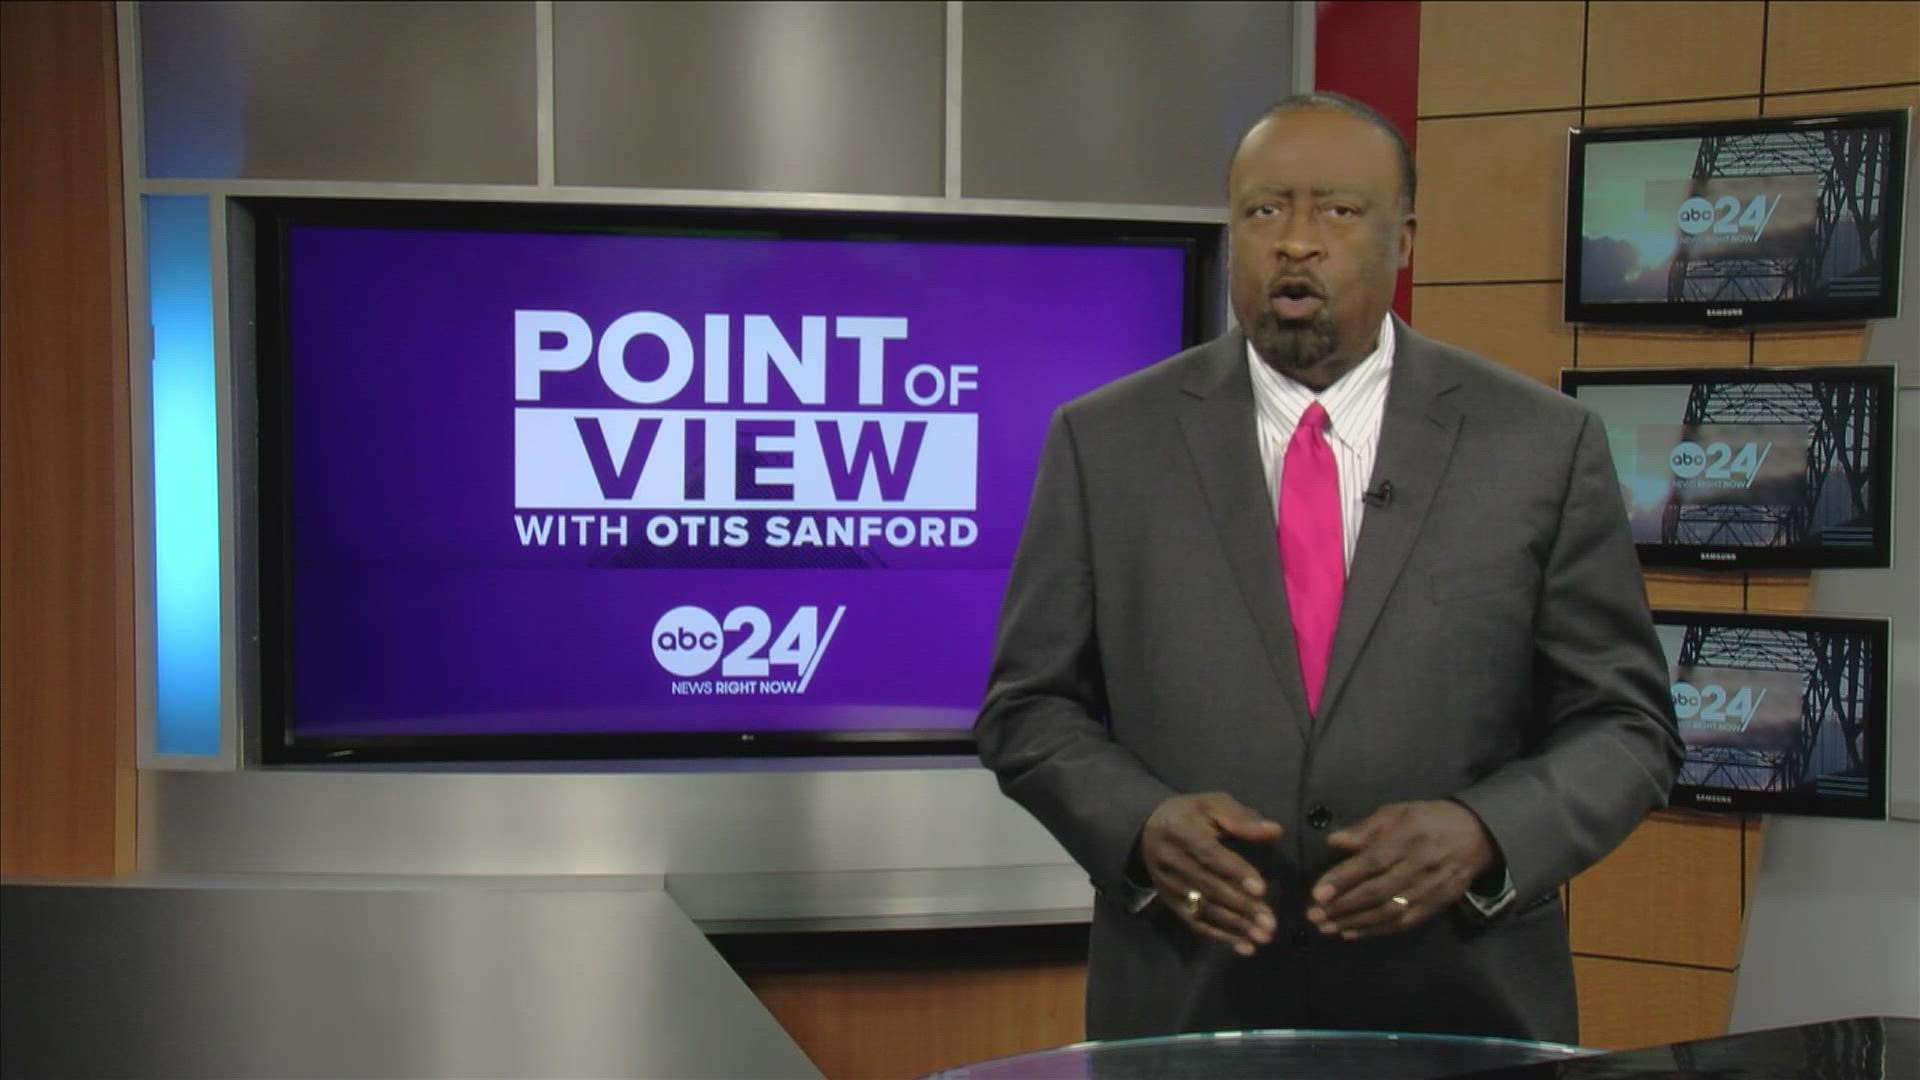 ABC24 political analyst and commentator Otis Sanford shared his point of view on the legal battle over early voting in Shelby County.